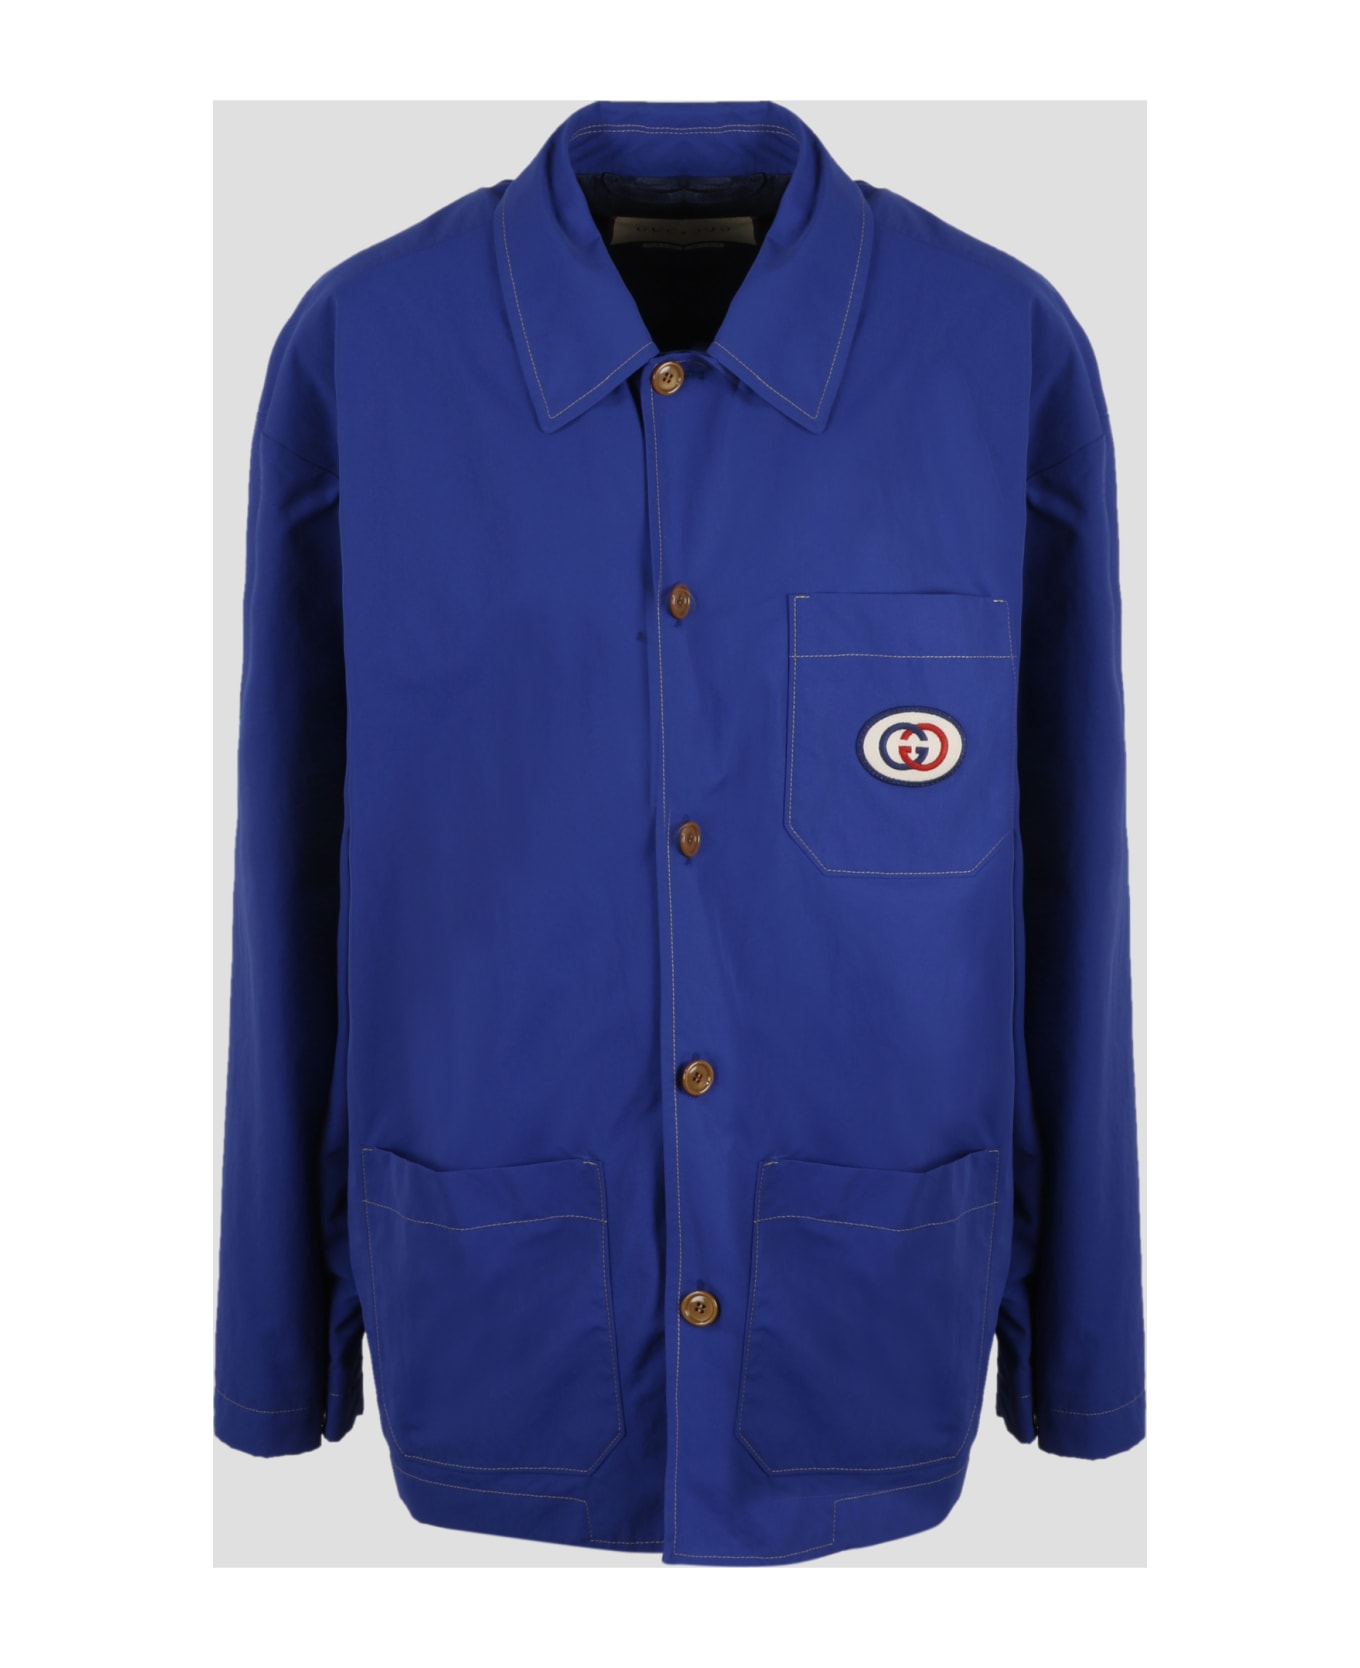 Gucci Nylon Jacket With Gg Patch - Blue